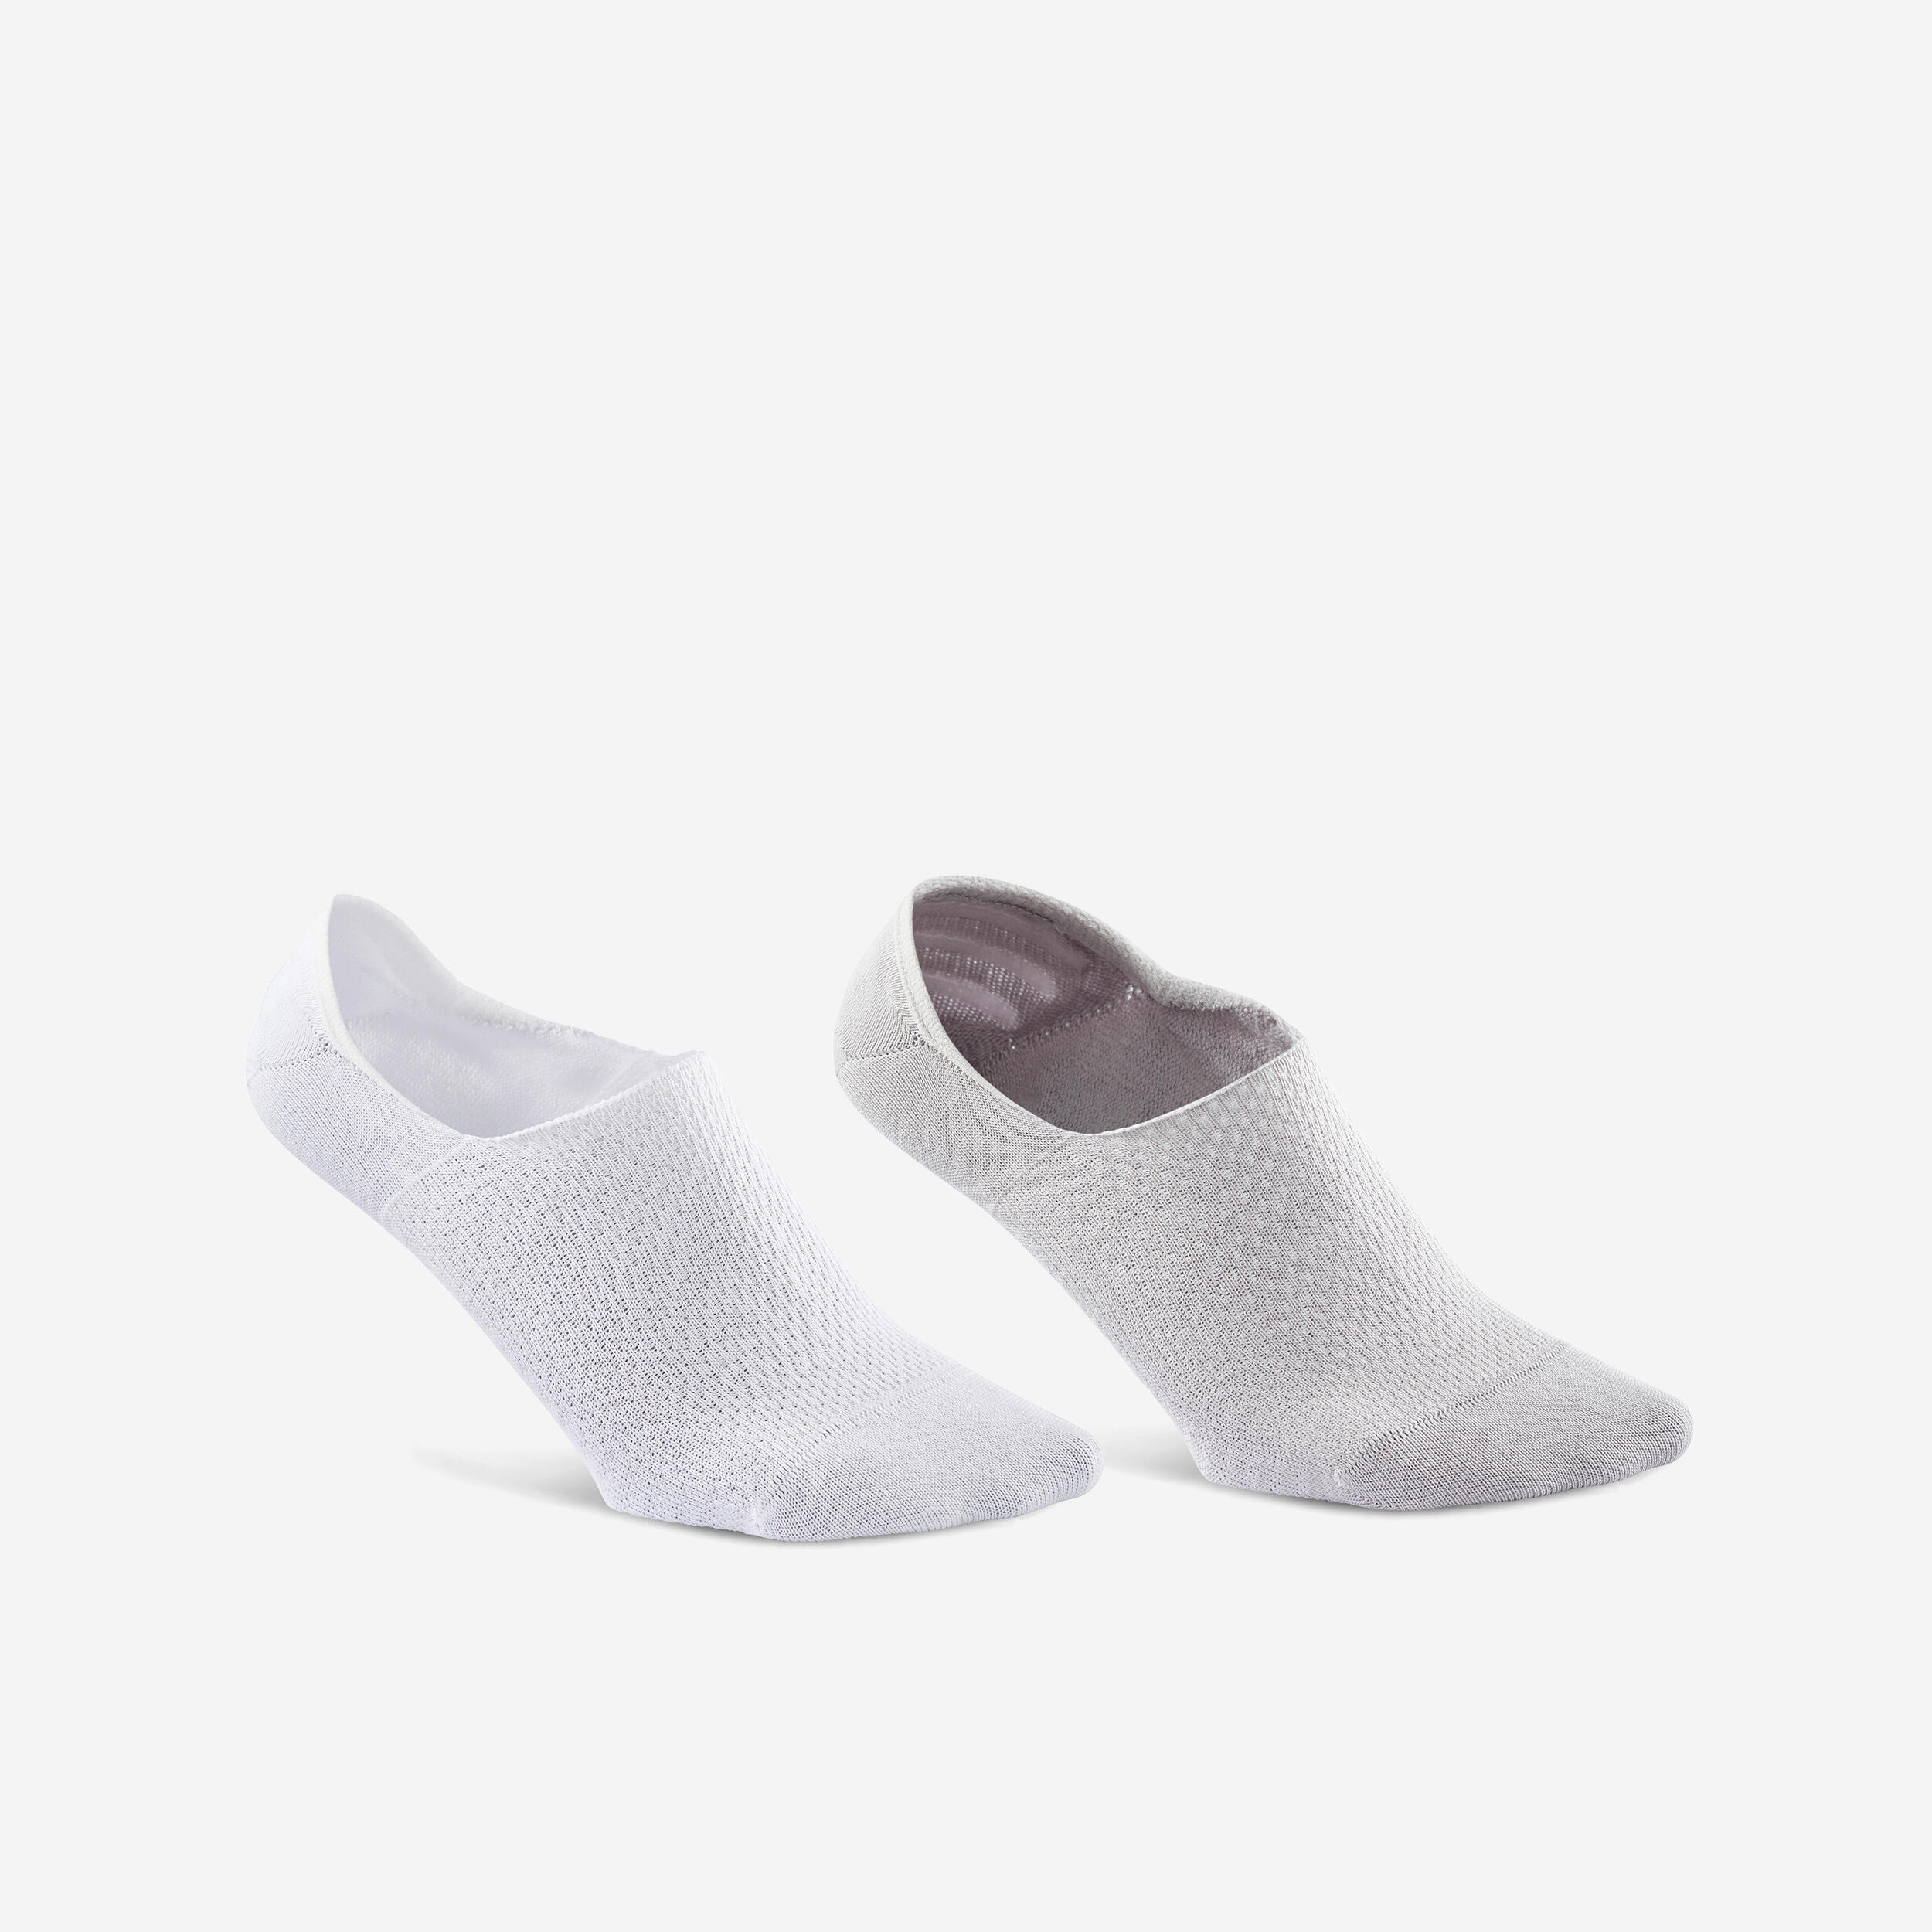 NEWFEEL Invisible walking socks - pack of 2 pairs - white/grey